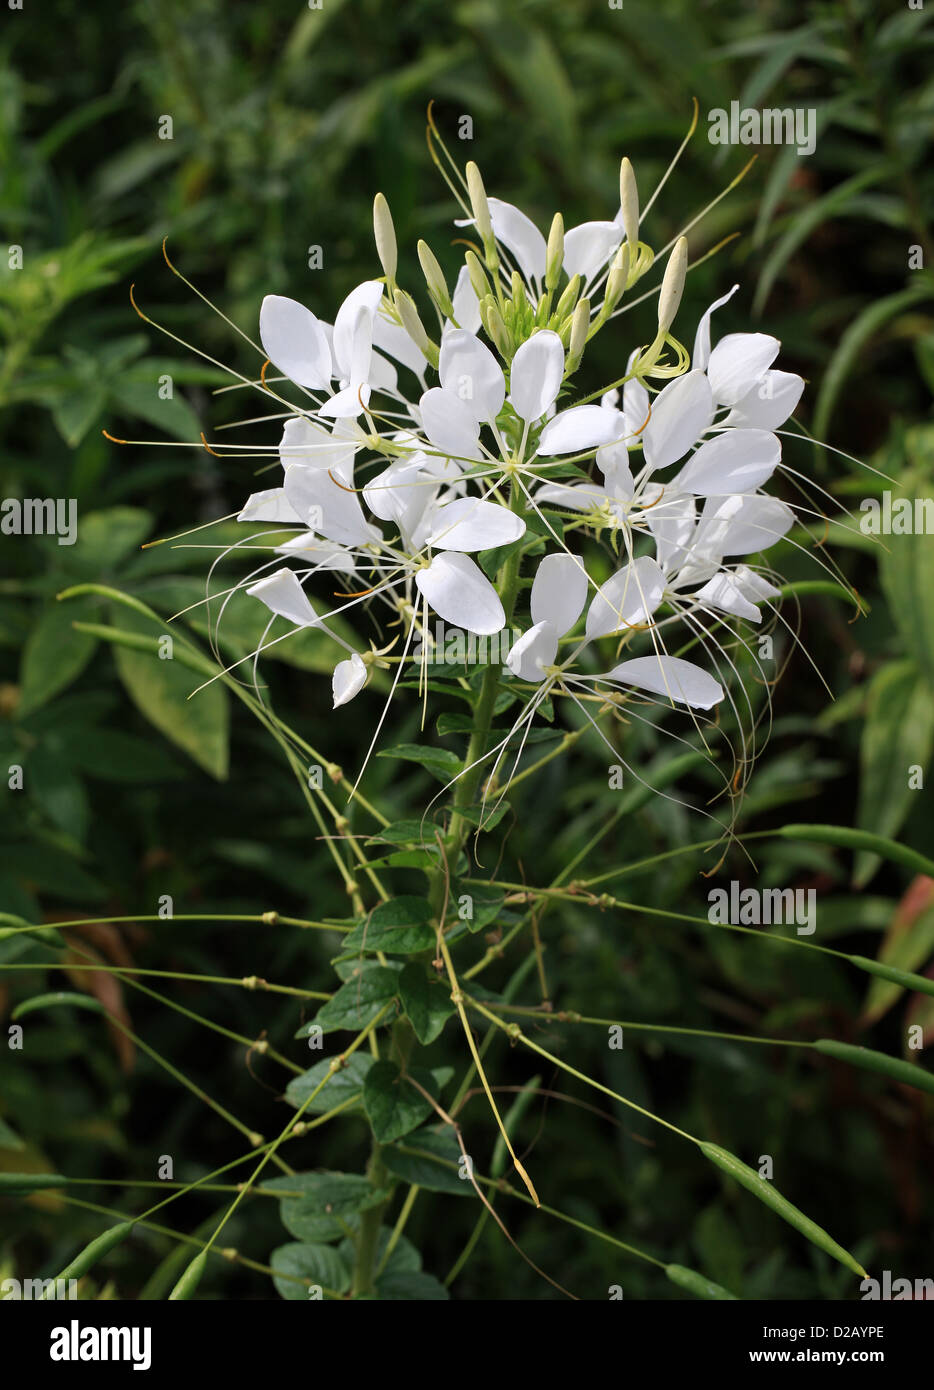 White Spider Flower, Cleome hassleriana (Cleome spinosa 'White Queen'), Cleomaceae. Native to southern South America. Stock Photo